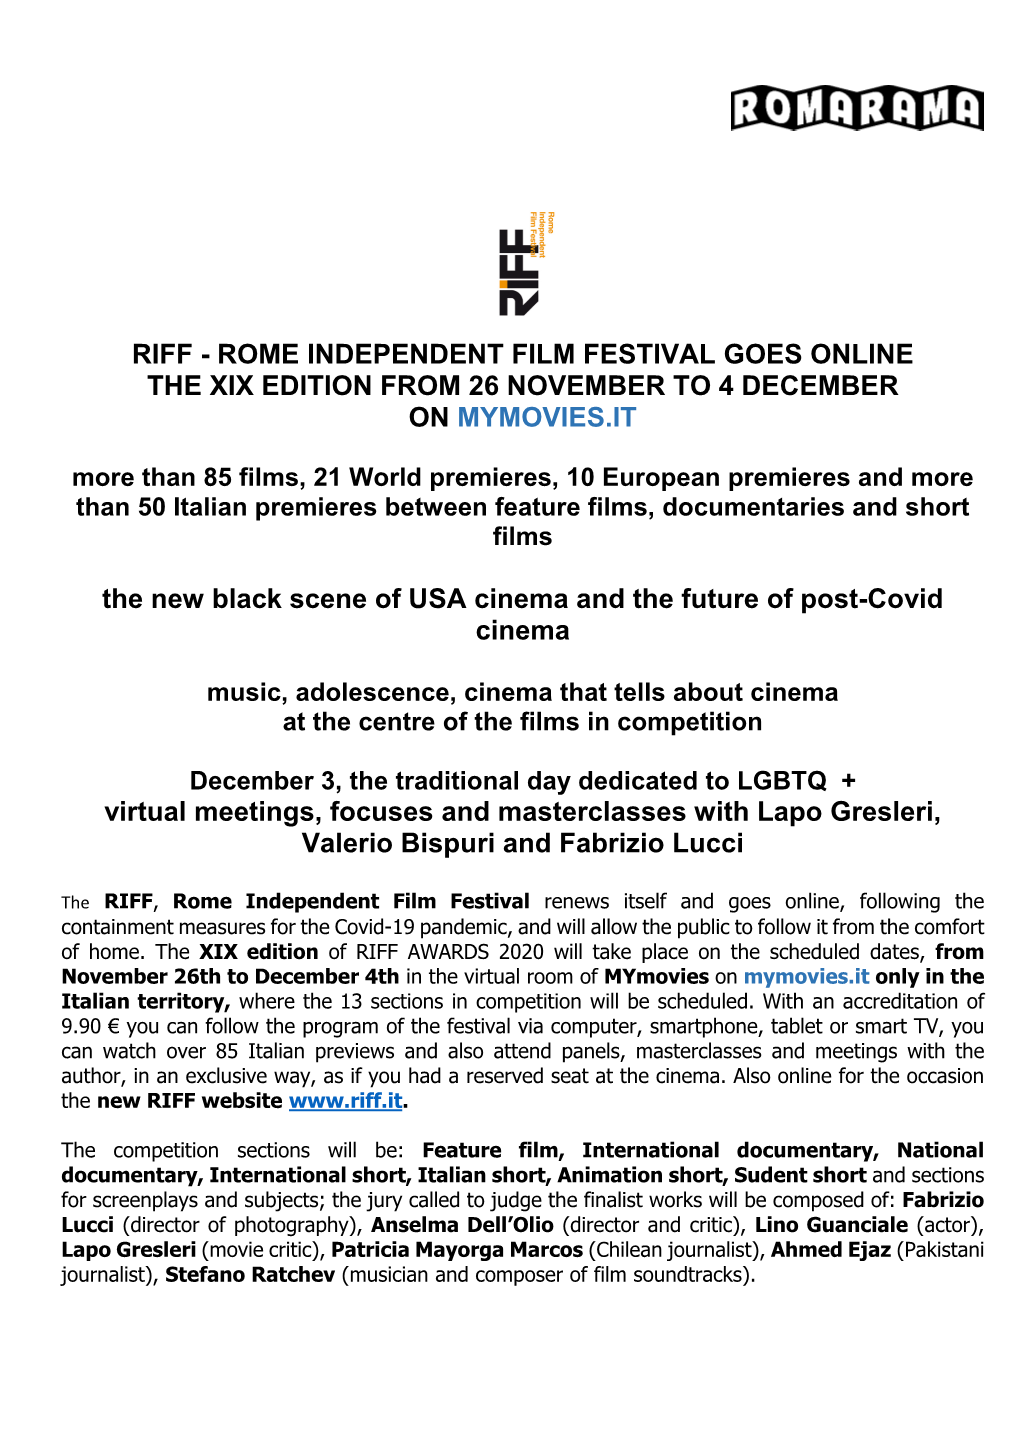 Riff - Rome Independent Film Festival Goes Online the Xix Edition from 26 November to 4 December on Mymovies.It